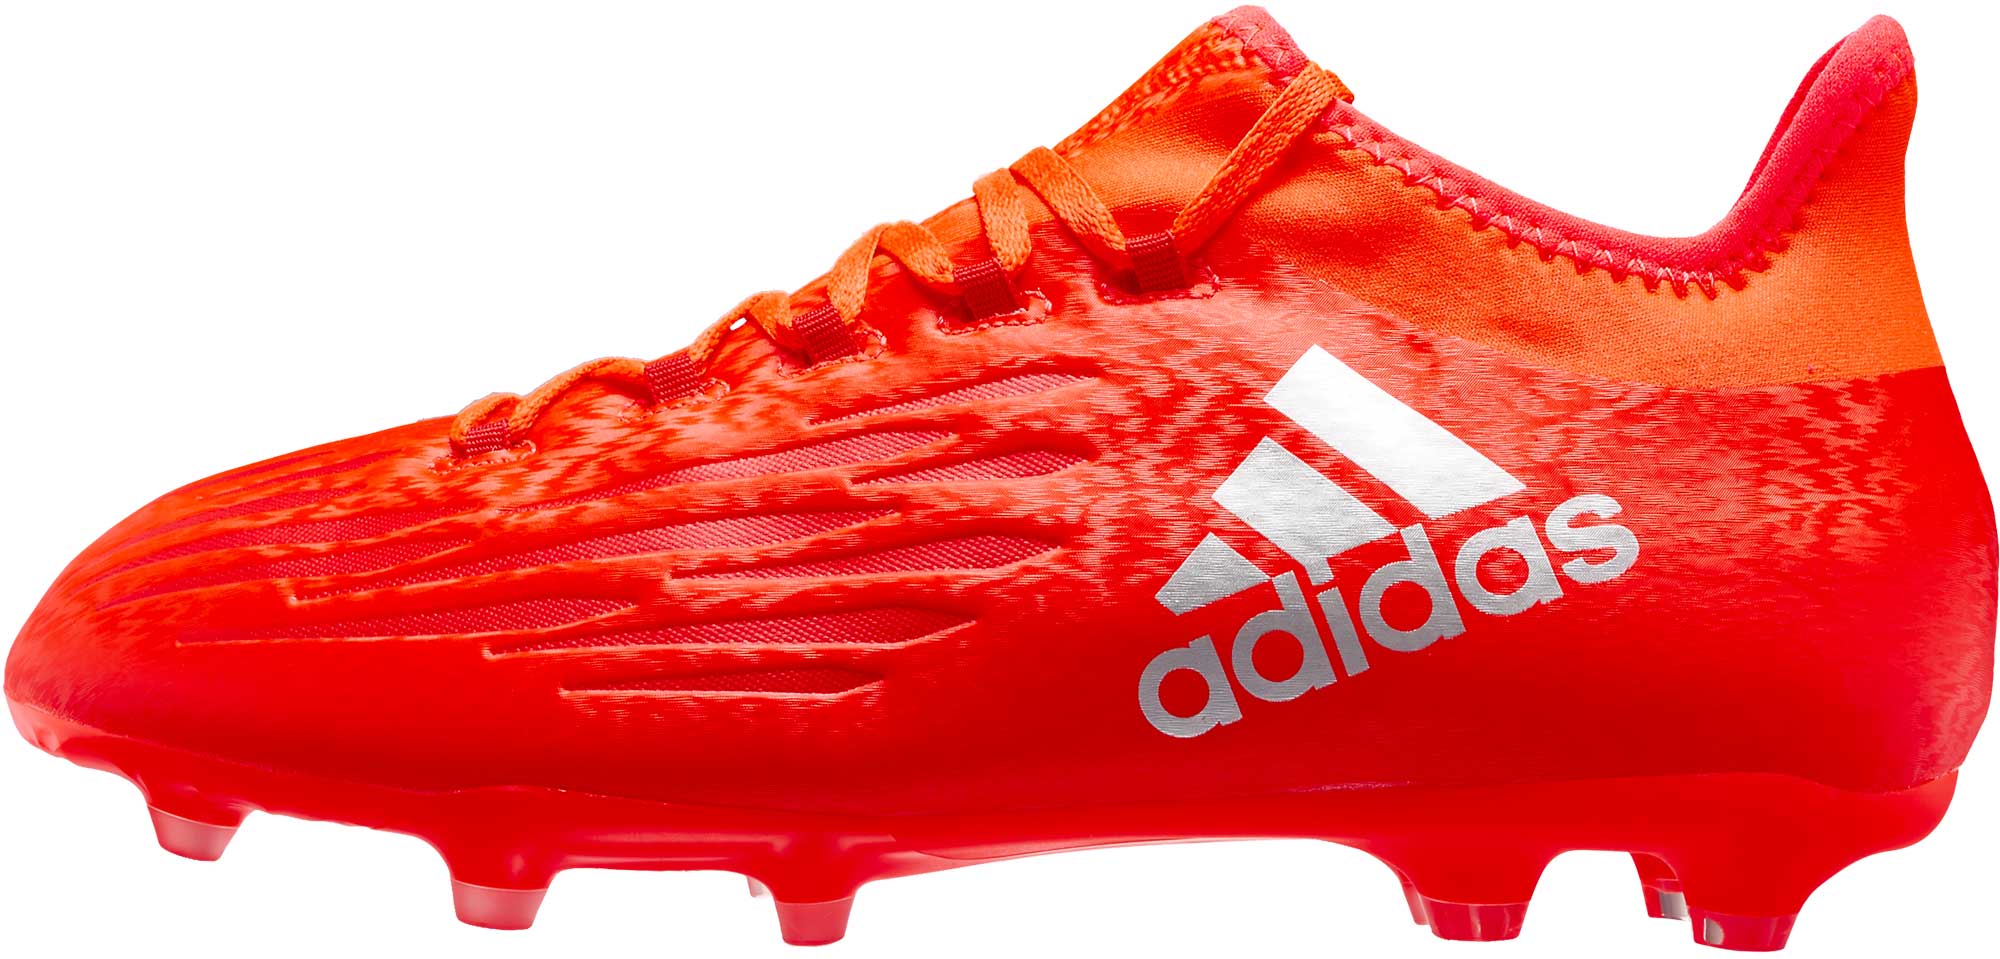 armoede Wacht even lava adidas Kids X 16.1 FG Cleats - adidas Soccer Shoes